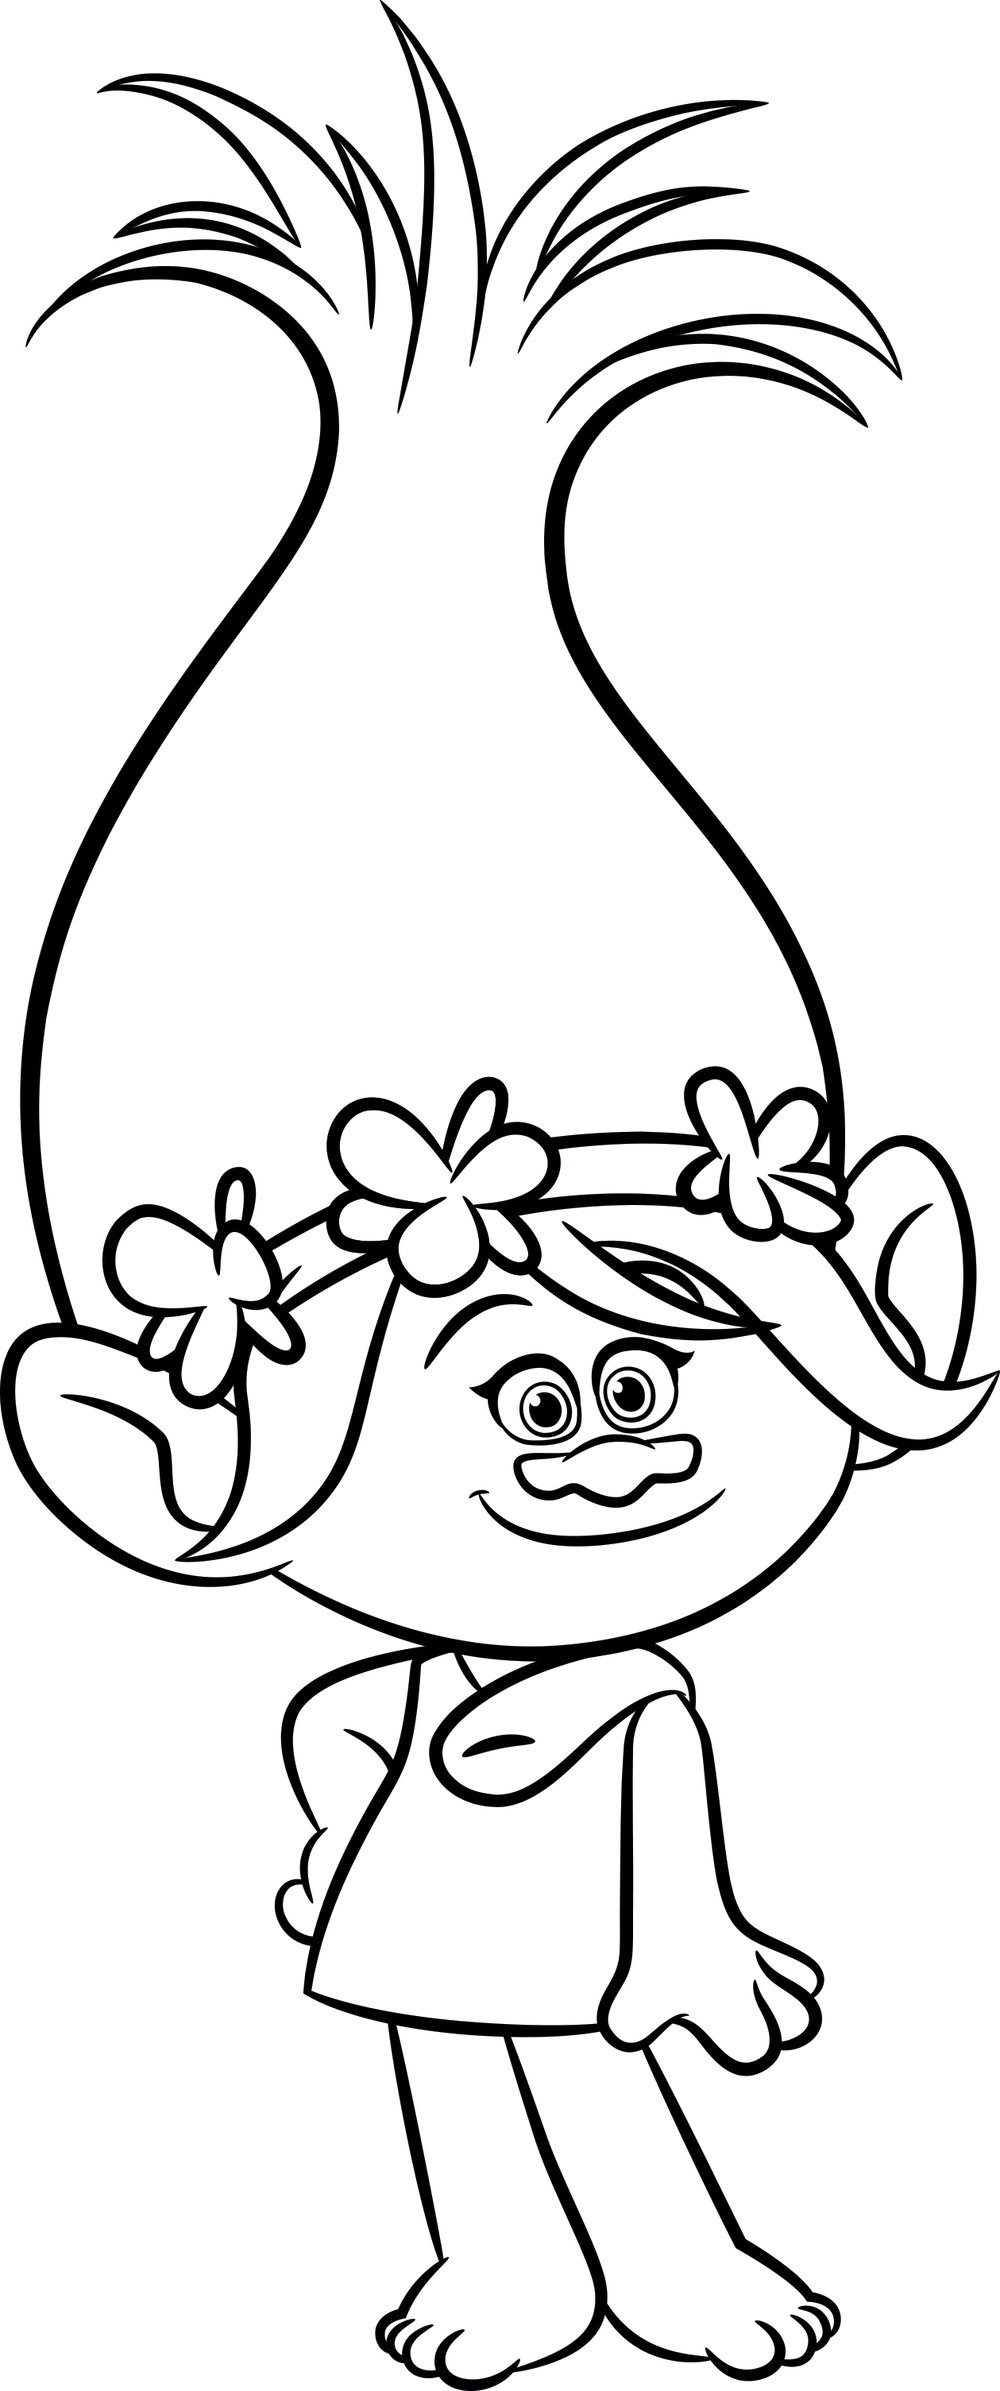 Trolls Printable Coloring Pages
 Bring Home Happy with DreamWorks Trolls